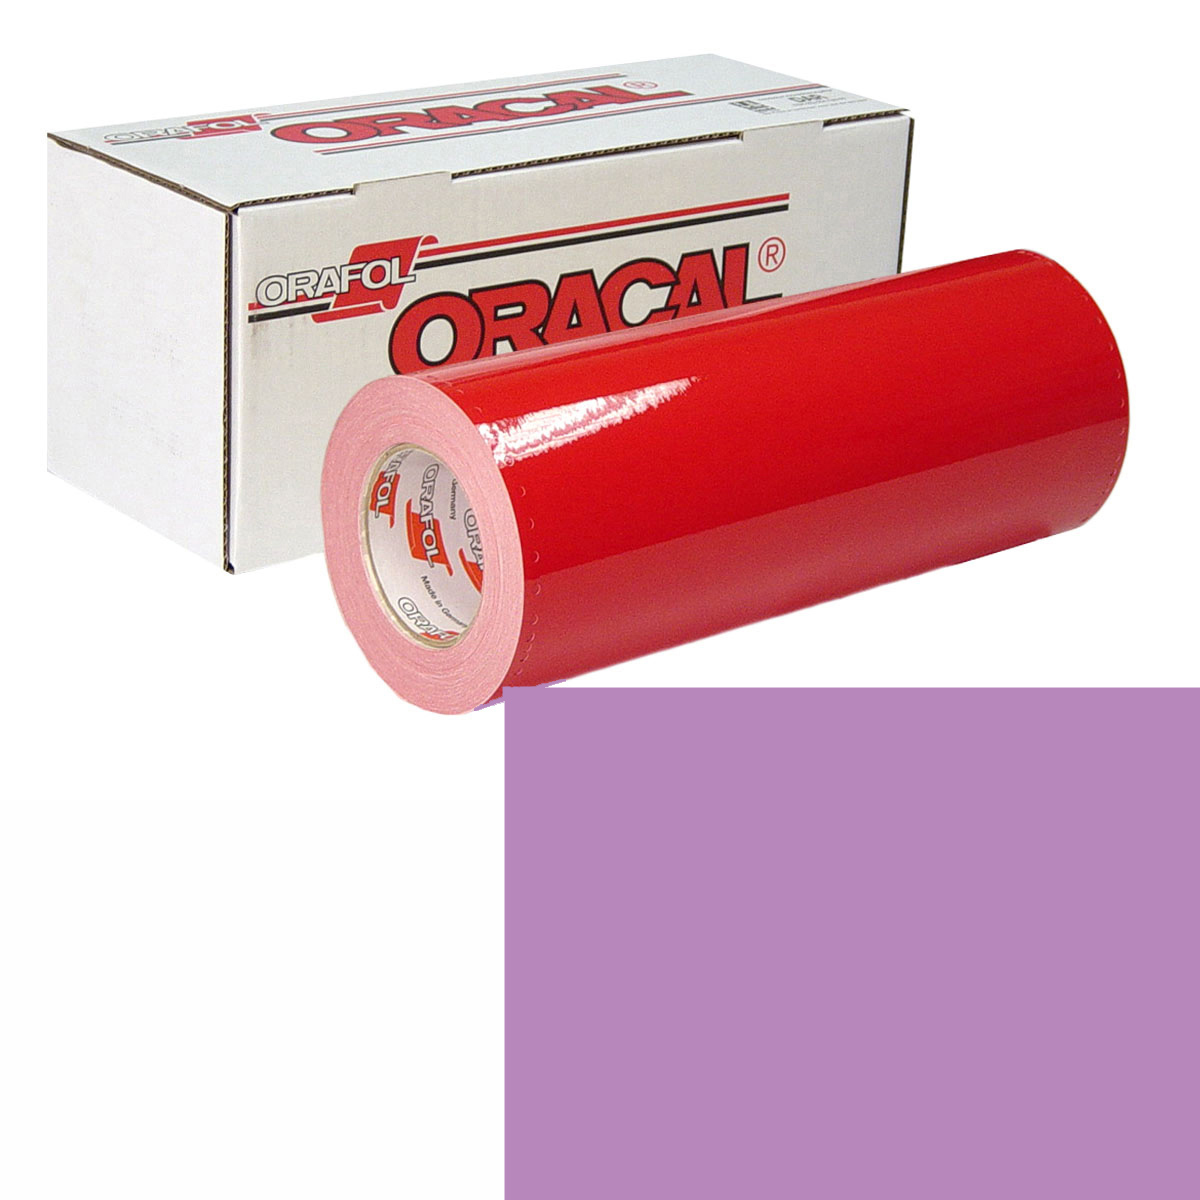 ORACAL 951 30in X 50yd 409 Pale Lilac